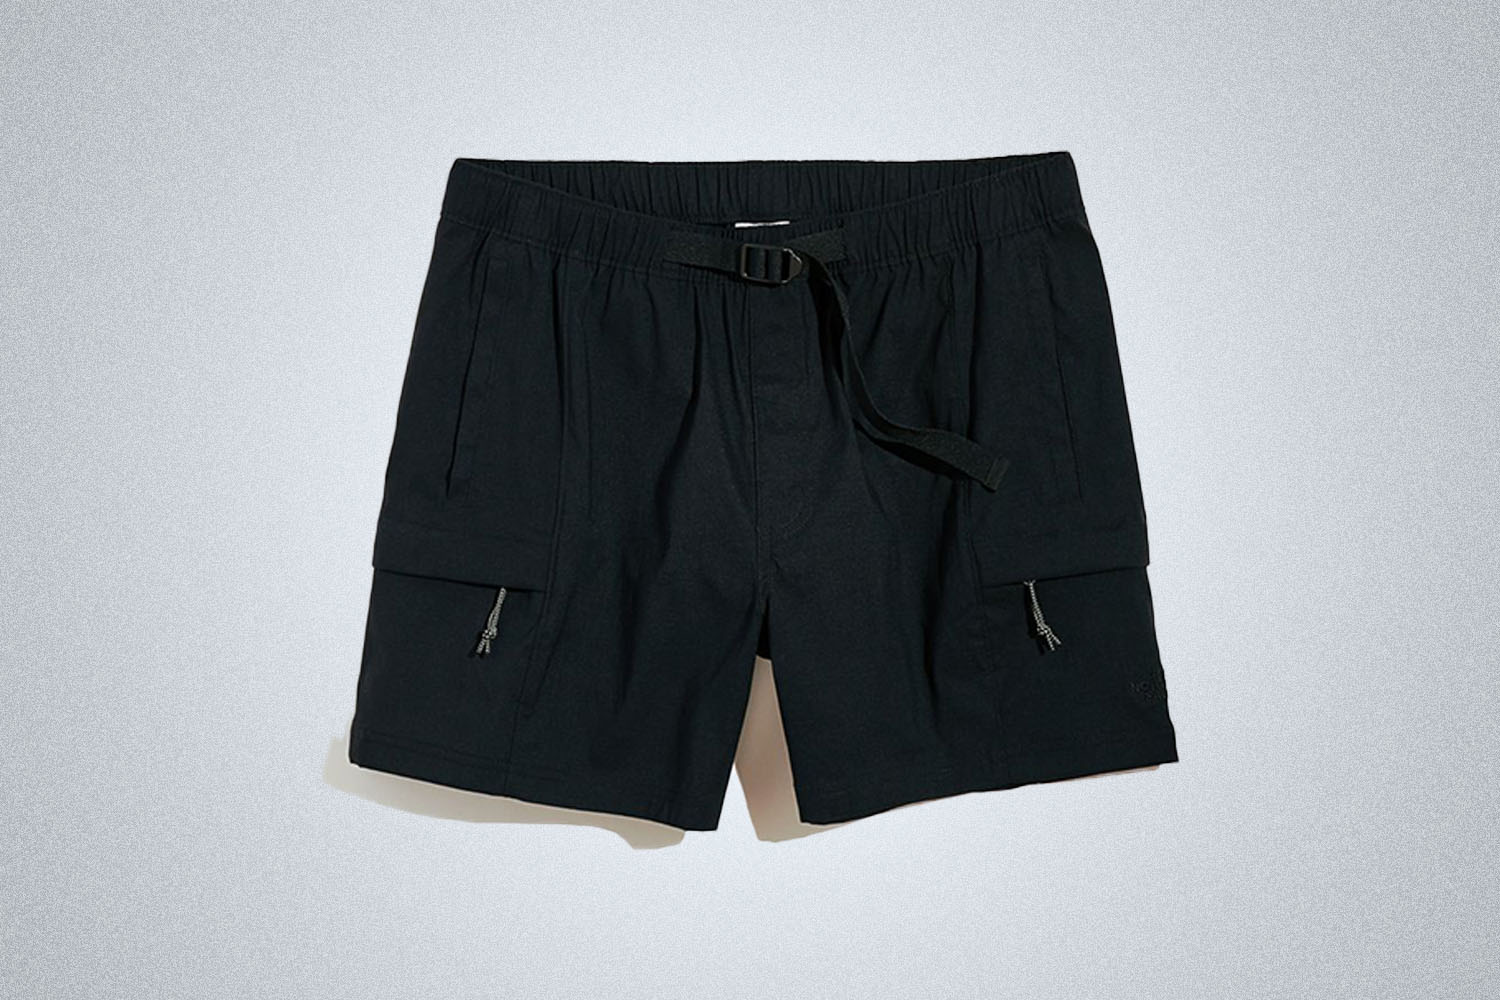 a pair of nylon shorts on a grey background